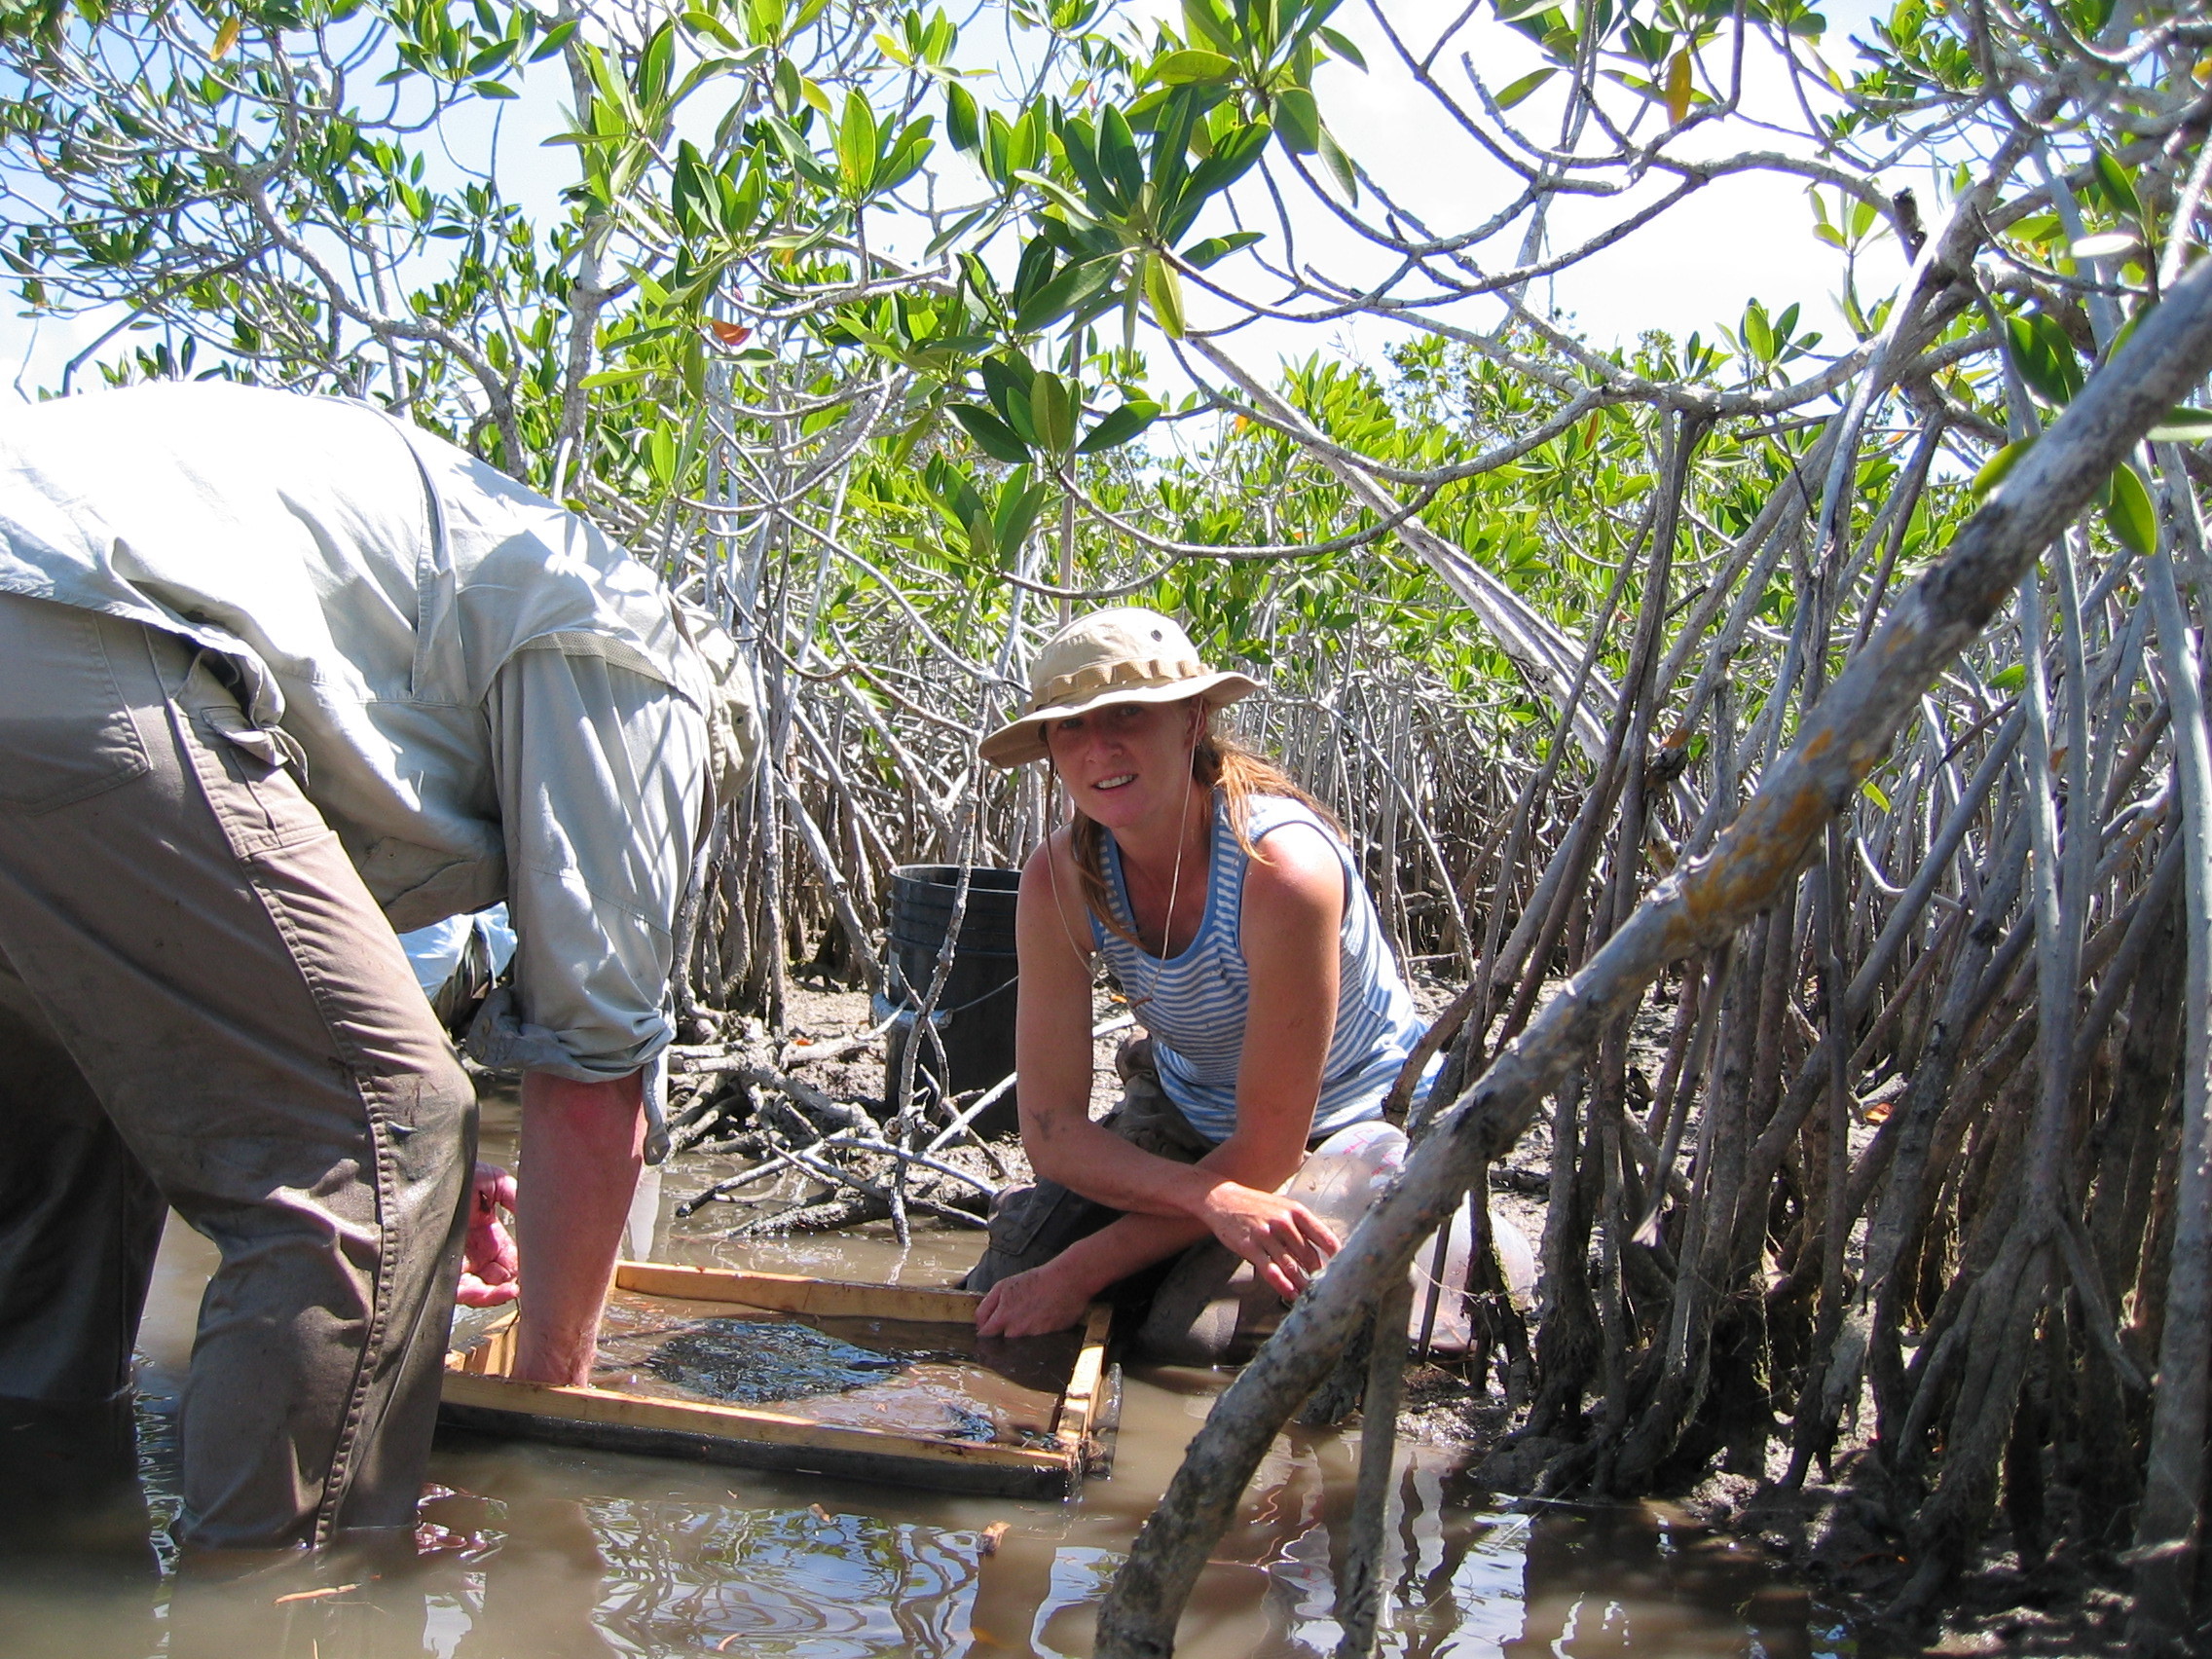 Left to right: Robert Twilley and Nicole Poret. Washing mangrove fine roots to set up a decomposition experiment at TS/Ph-8 in Taylor Slough